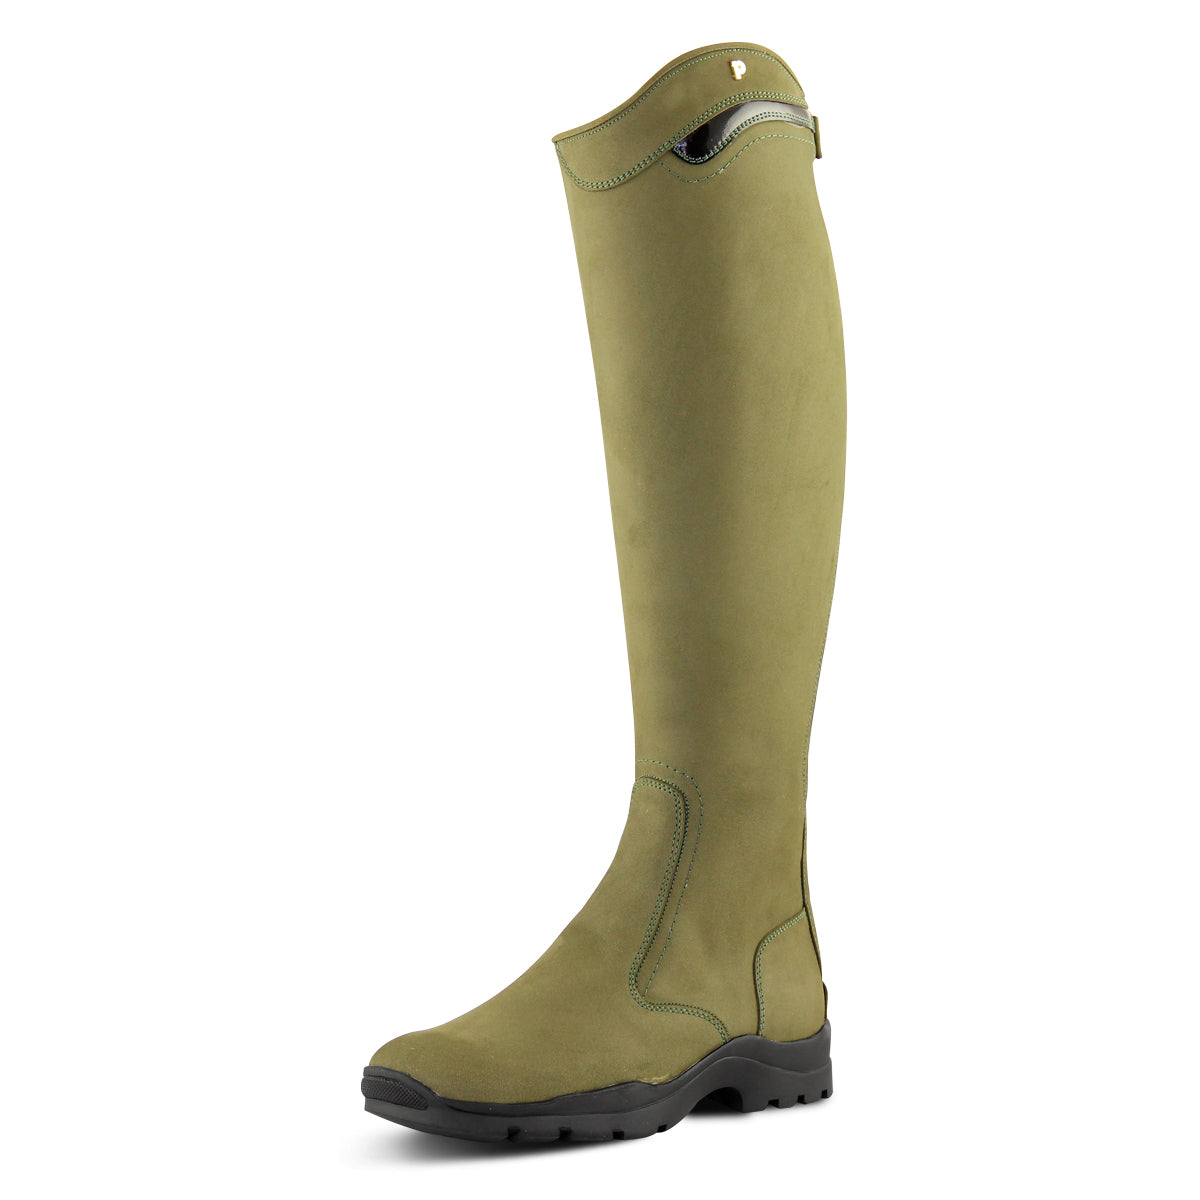 Petrie Explorer Riding Boots Boots Petrie - Equestrian Fashion Outfitters